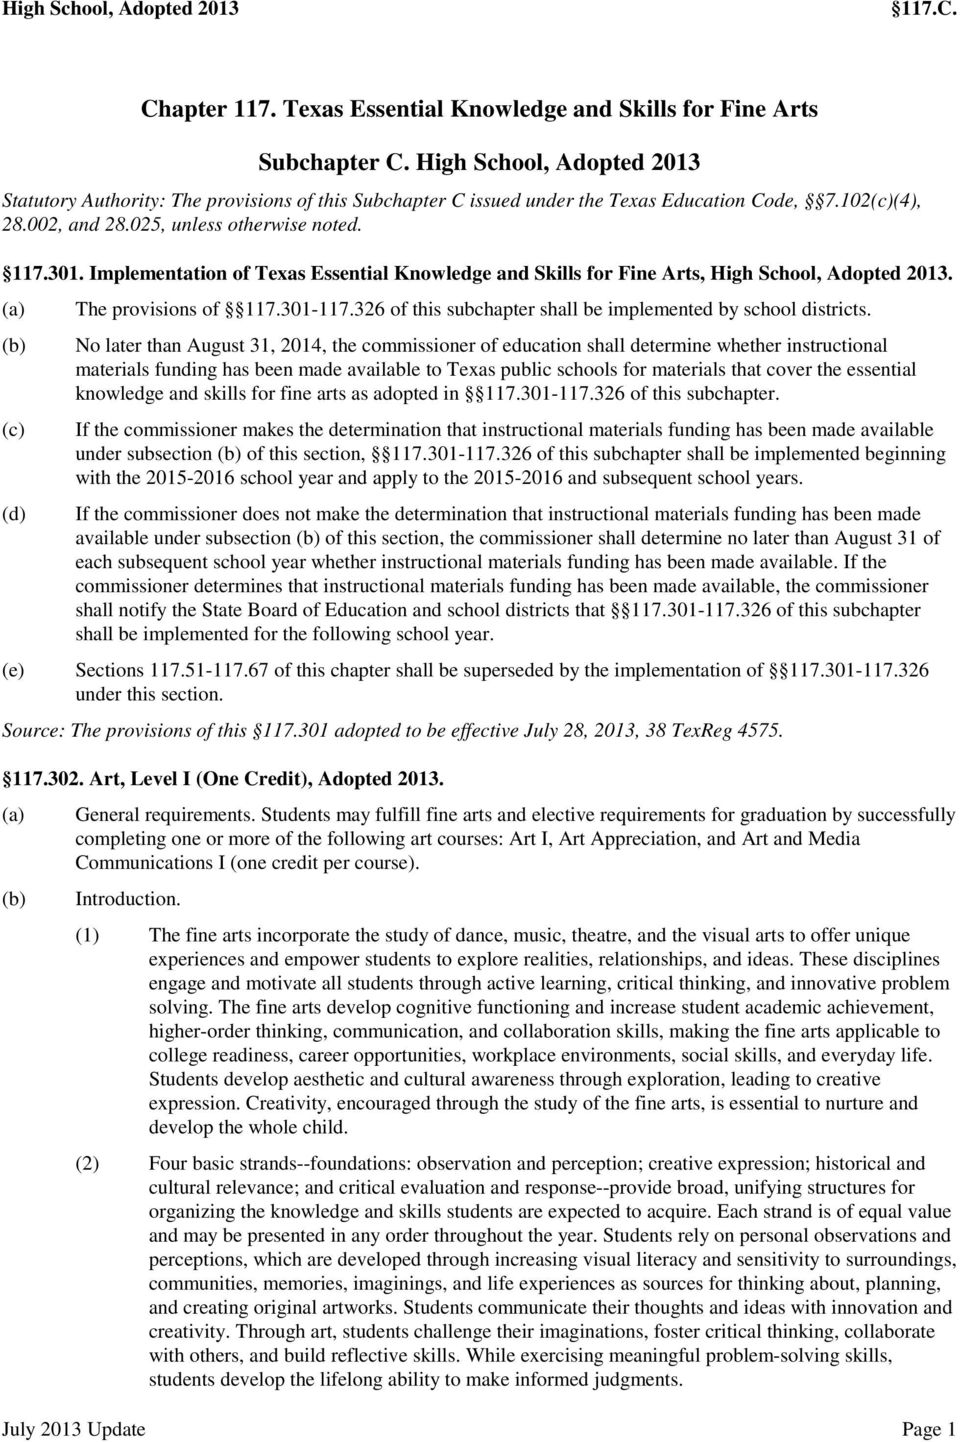 Implementation of Texas Essential Knowledge and Skills for Fine Arts, High School, Adopted 2013. (a) (b) (c) (d) The provisions of 117.301-117.